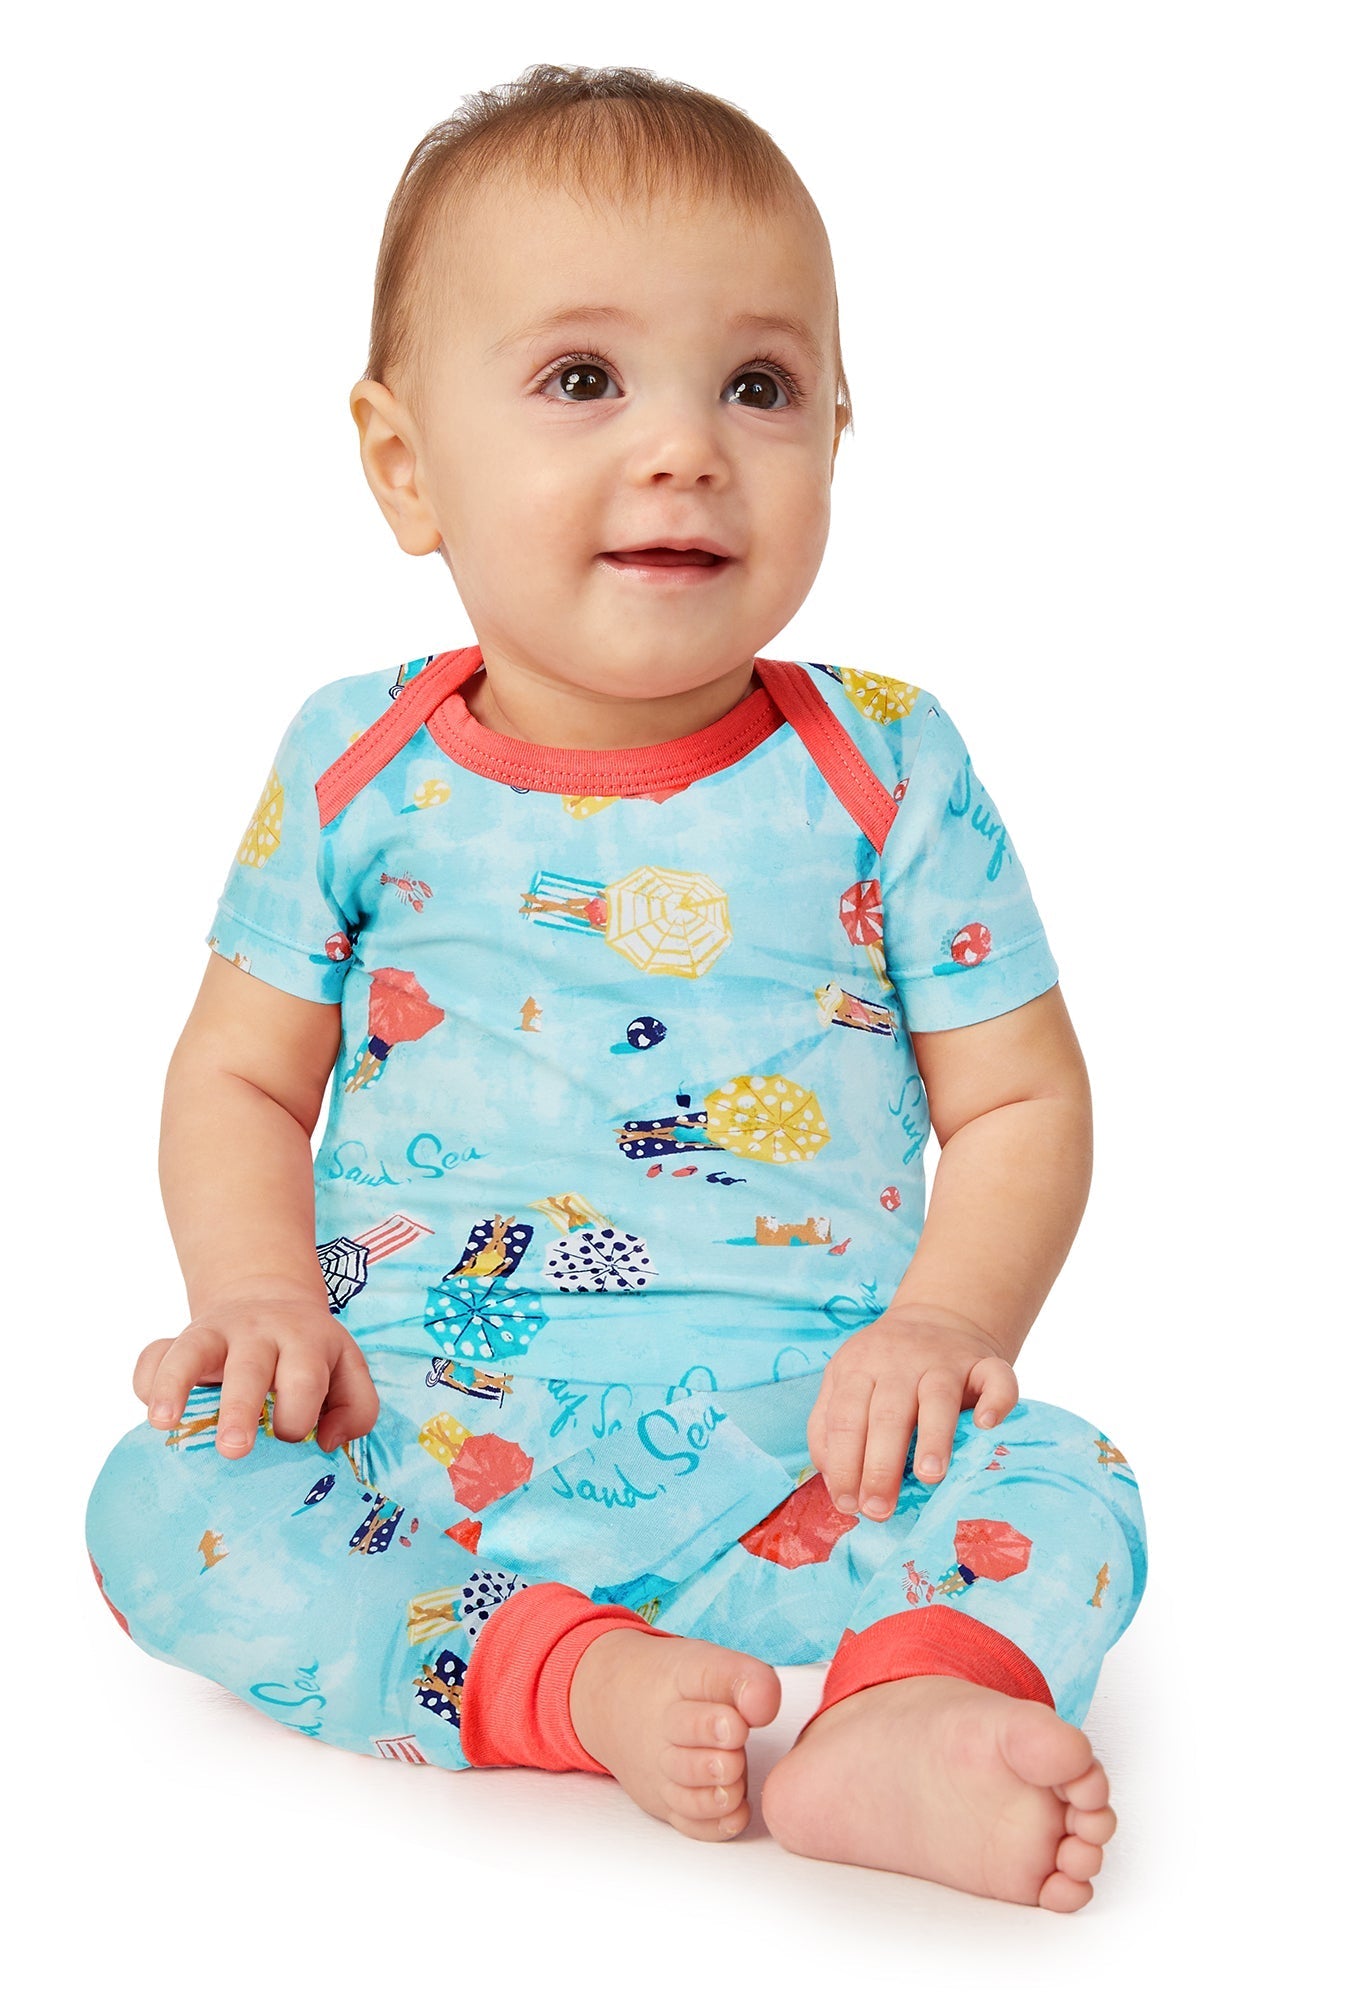 A baby wearing a short sleeve pj set with sunny day pattern.